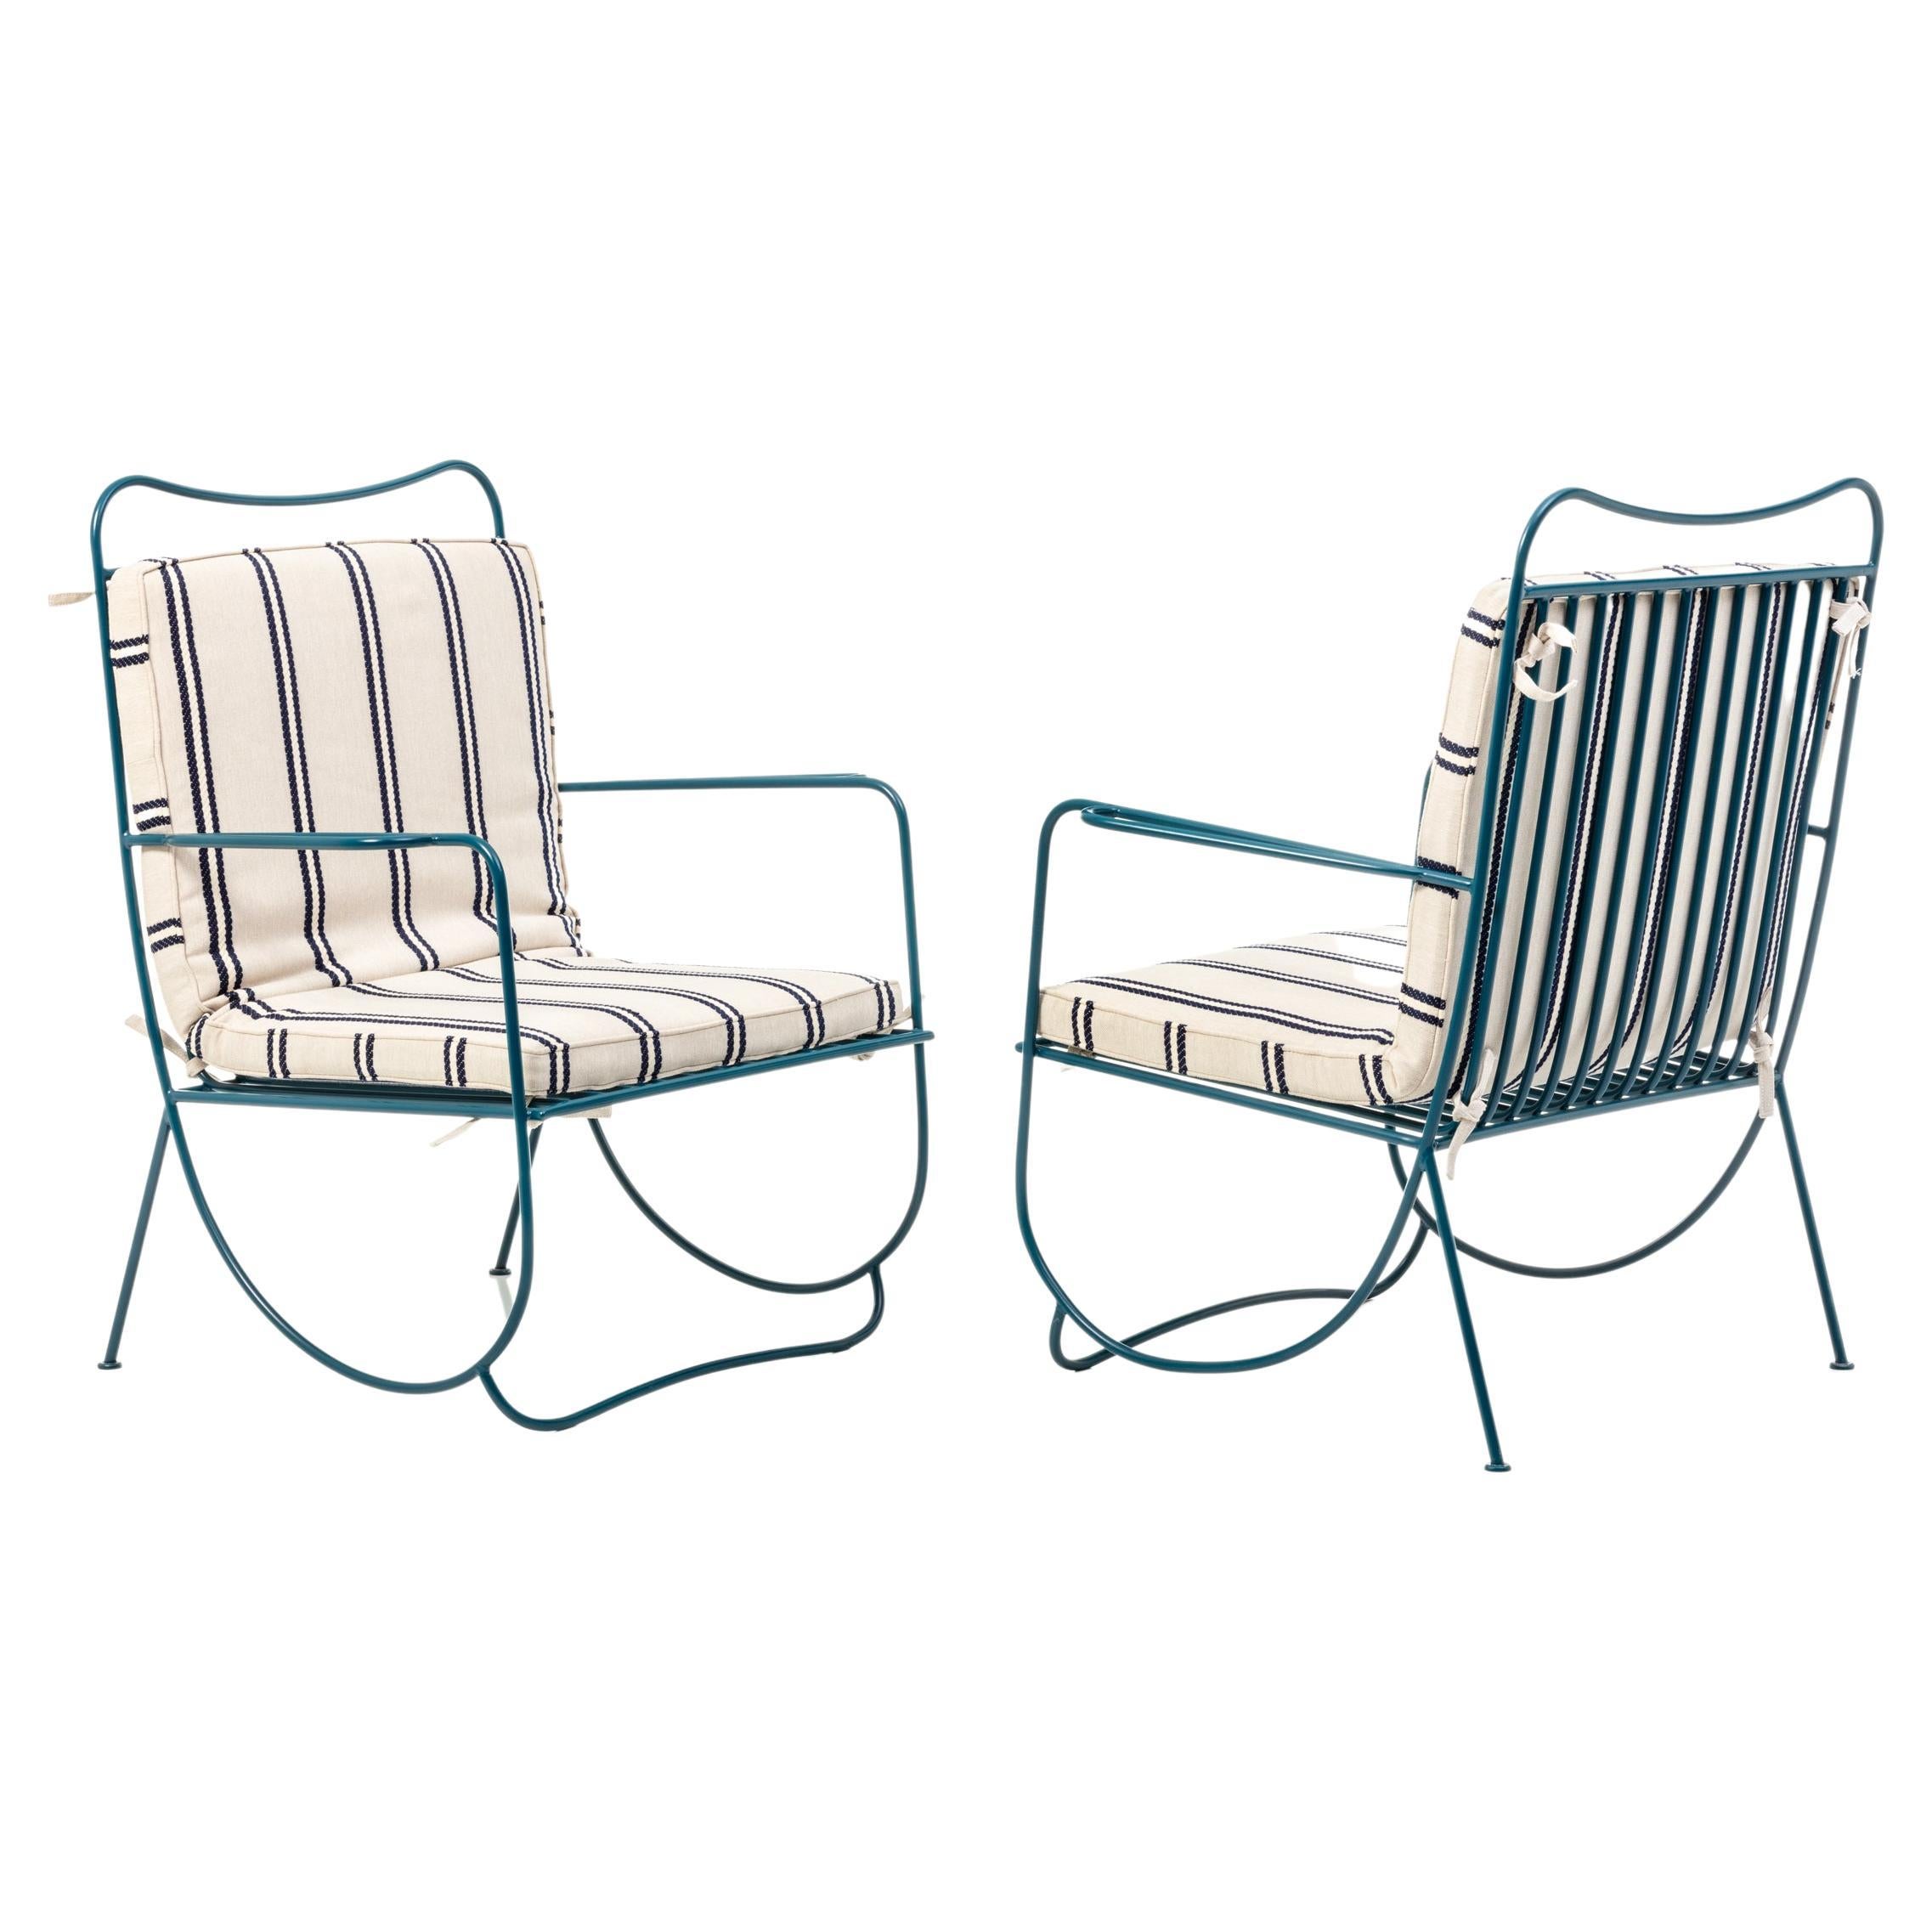 Echo Outdoor Lounge Chair